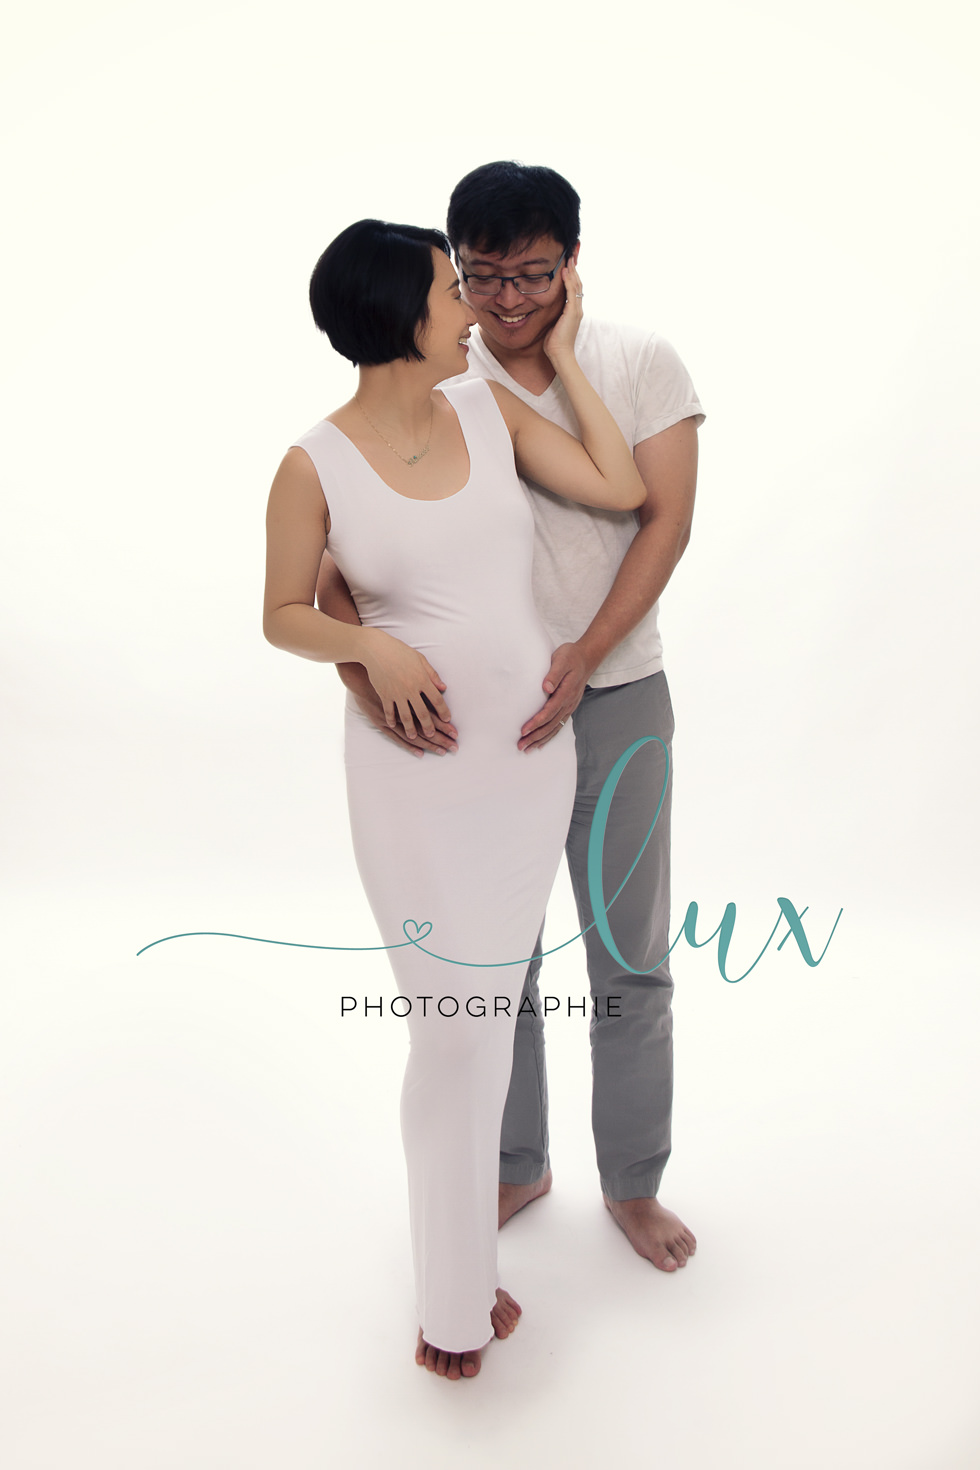 Montreal maternity photographer. Man and pregnant woman laughing.